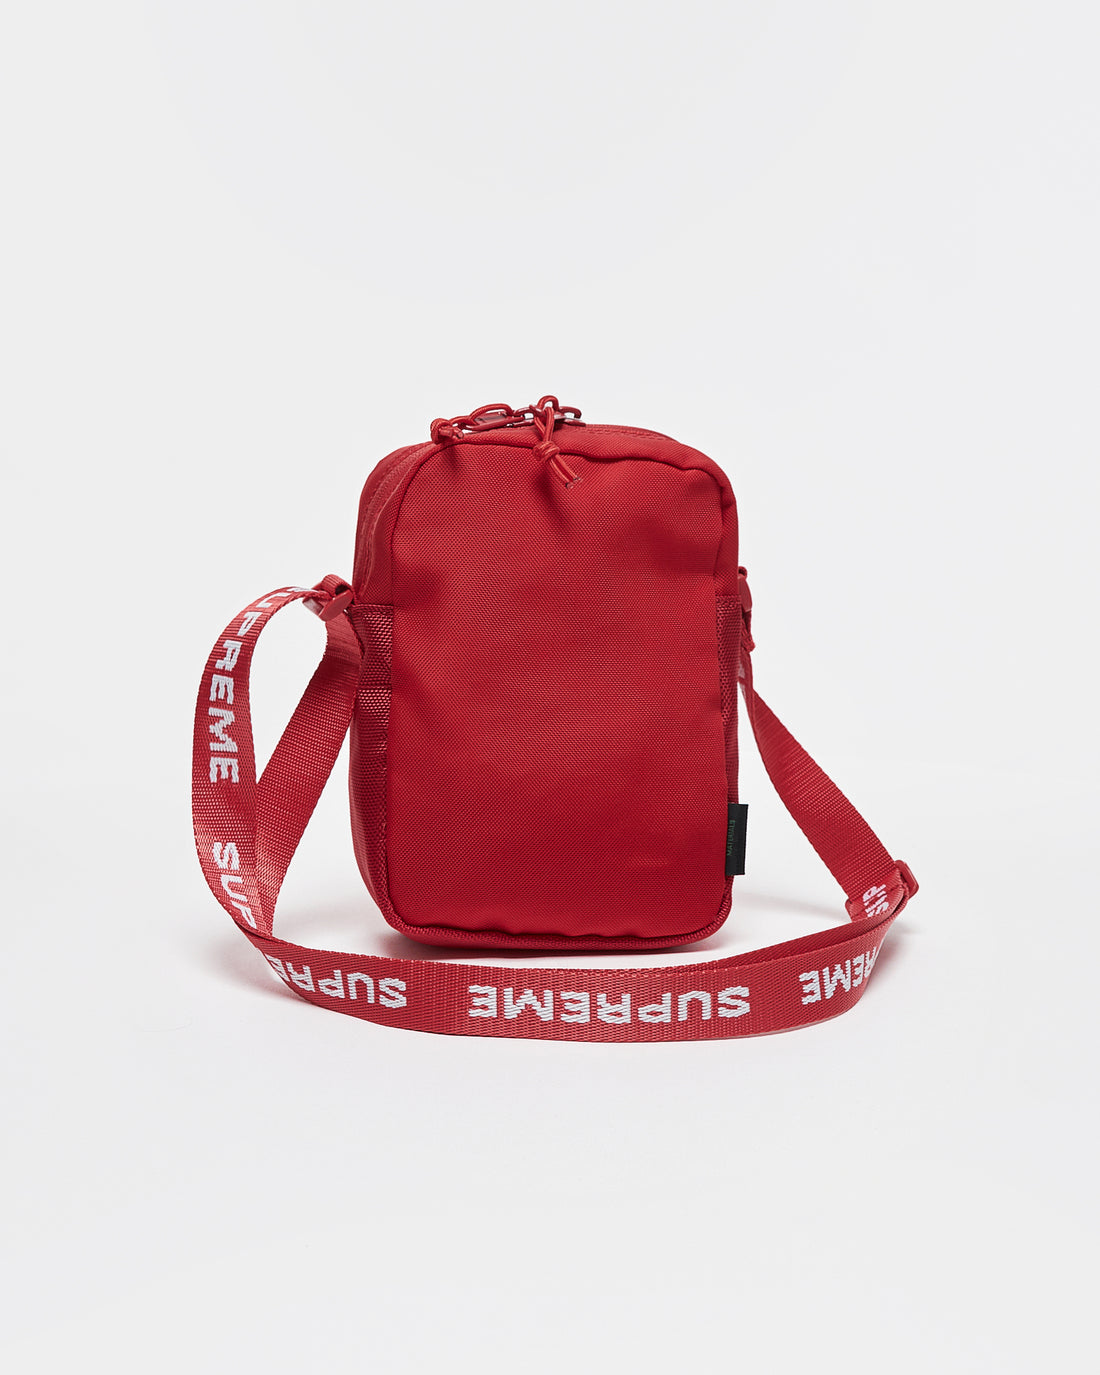 SUP Red Sling Bag 12.90